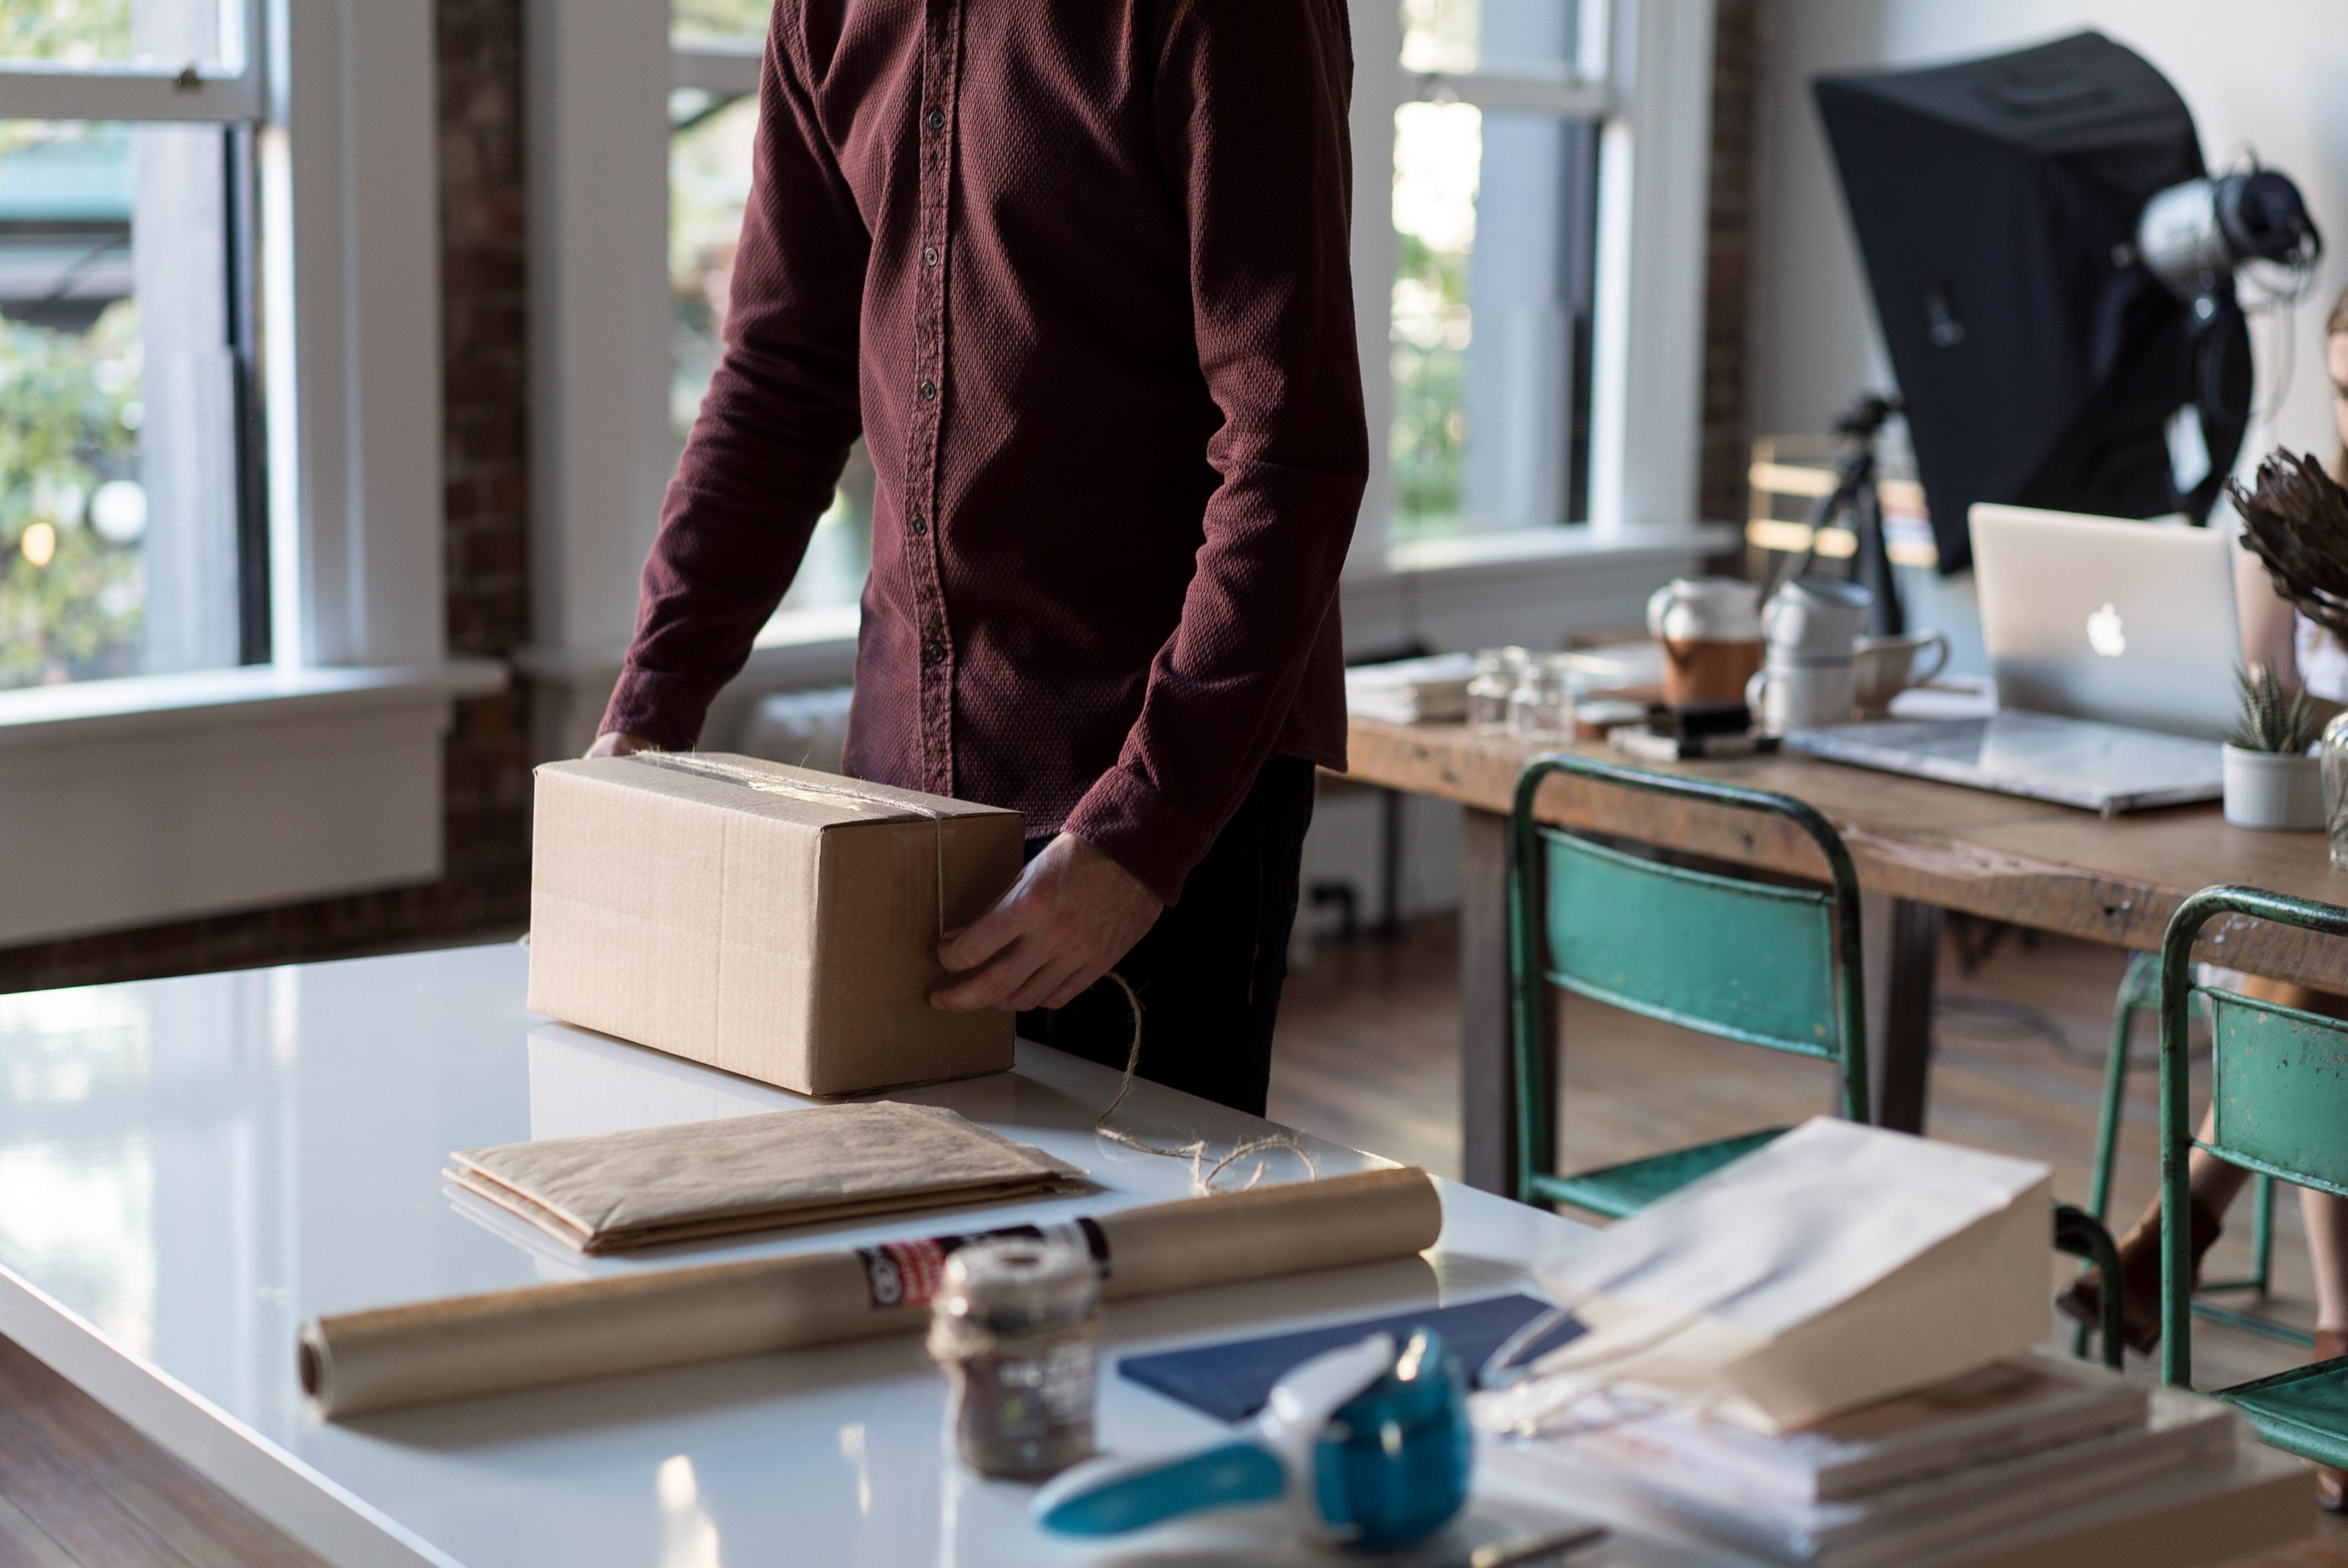 Man in small office preparing to ship a package; image by Bench Accounting, via Unsplash.com.